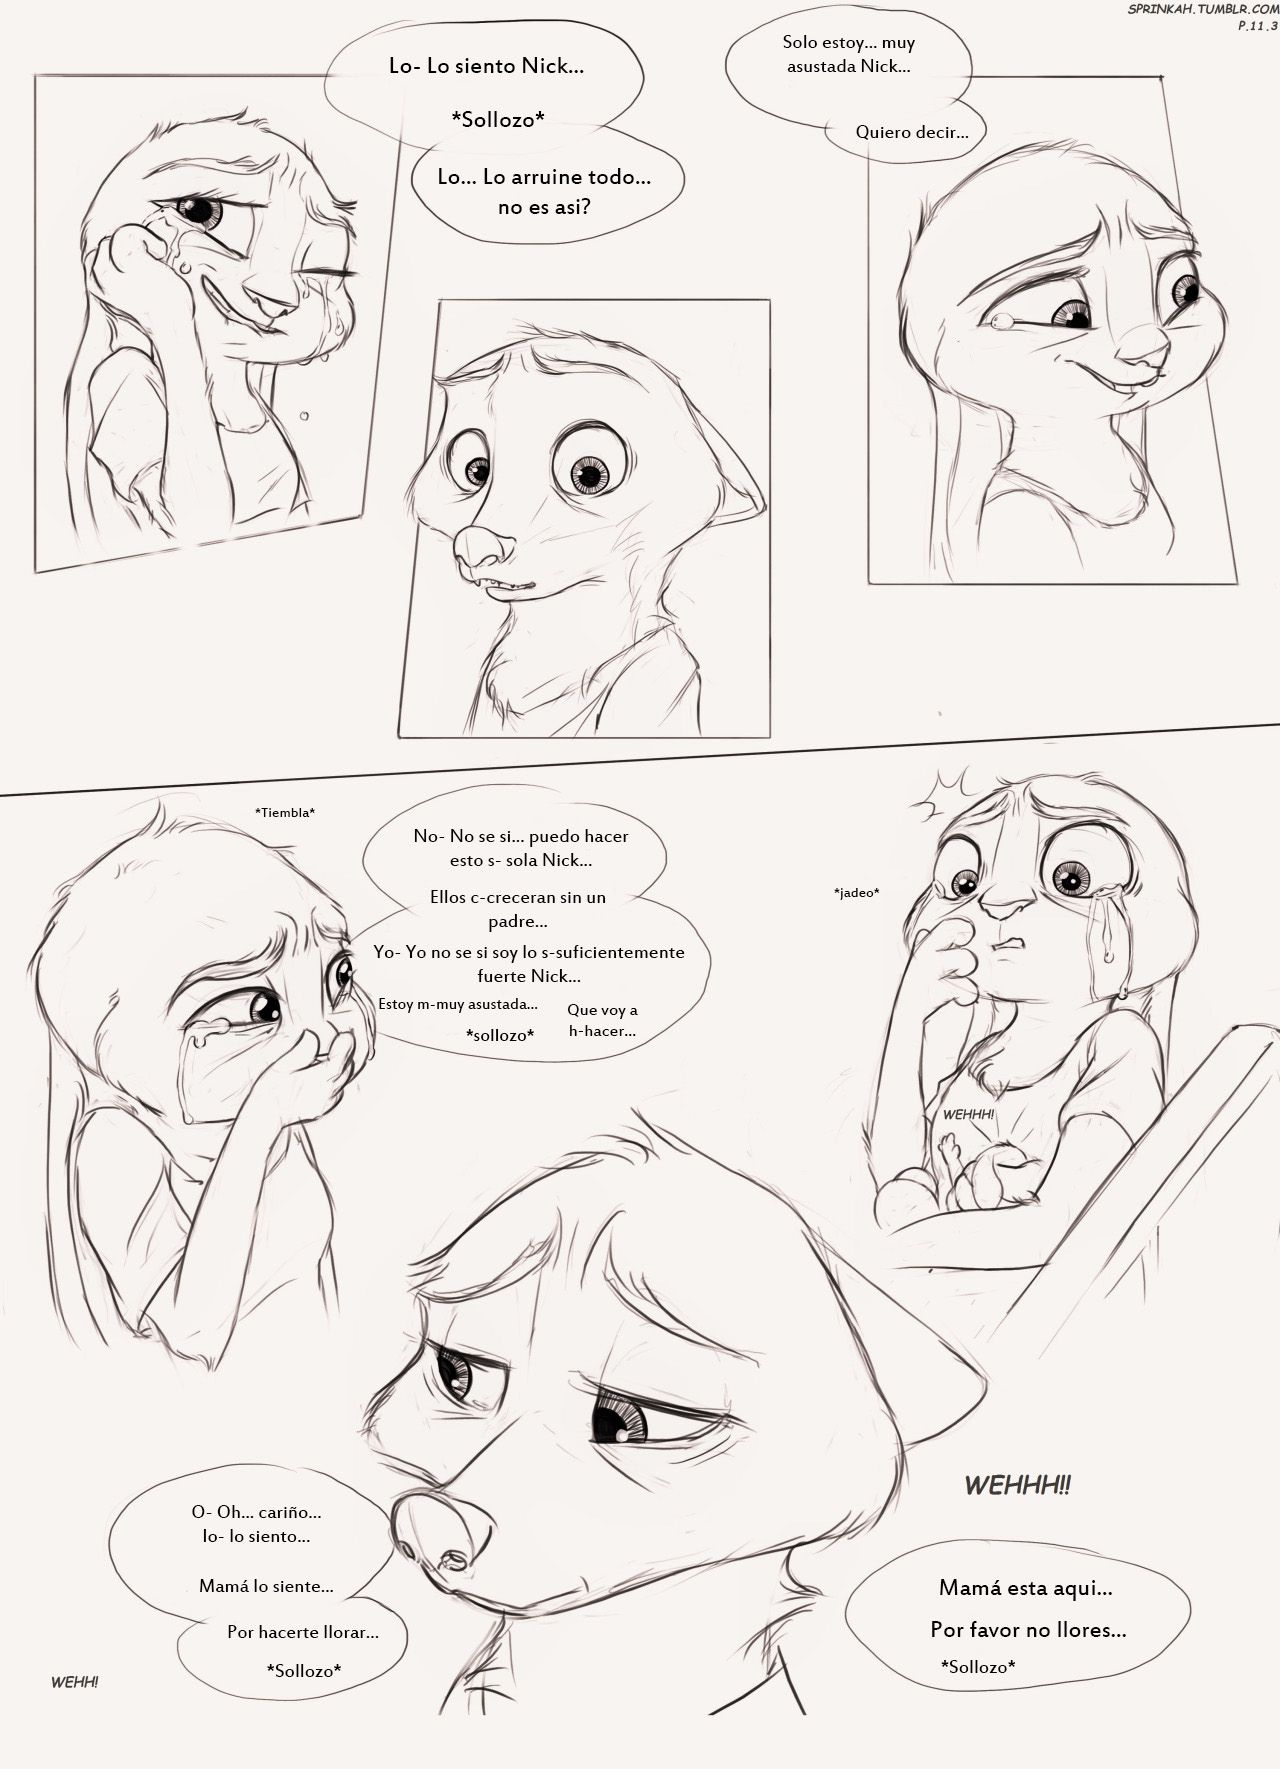 [Sprinkah] This is what true love looks like (Zootopia) (Spanish) (On Going) [Landsec] http://sprinkah.tumblr.com/ 19